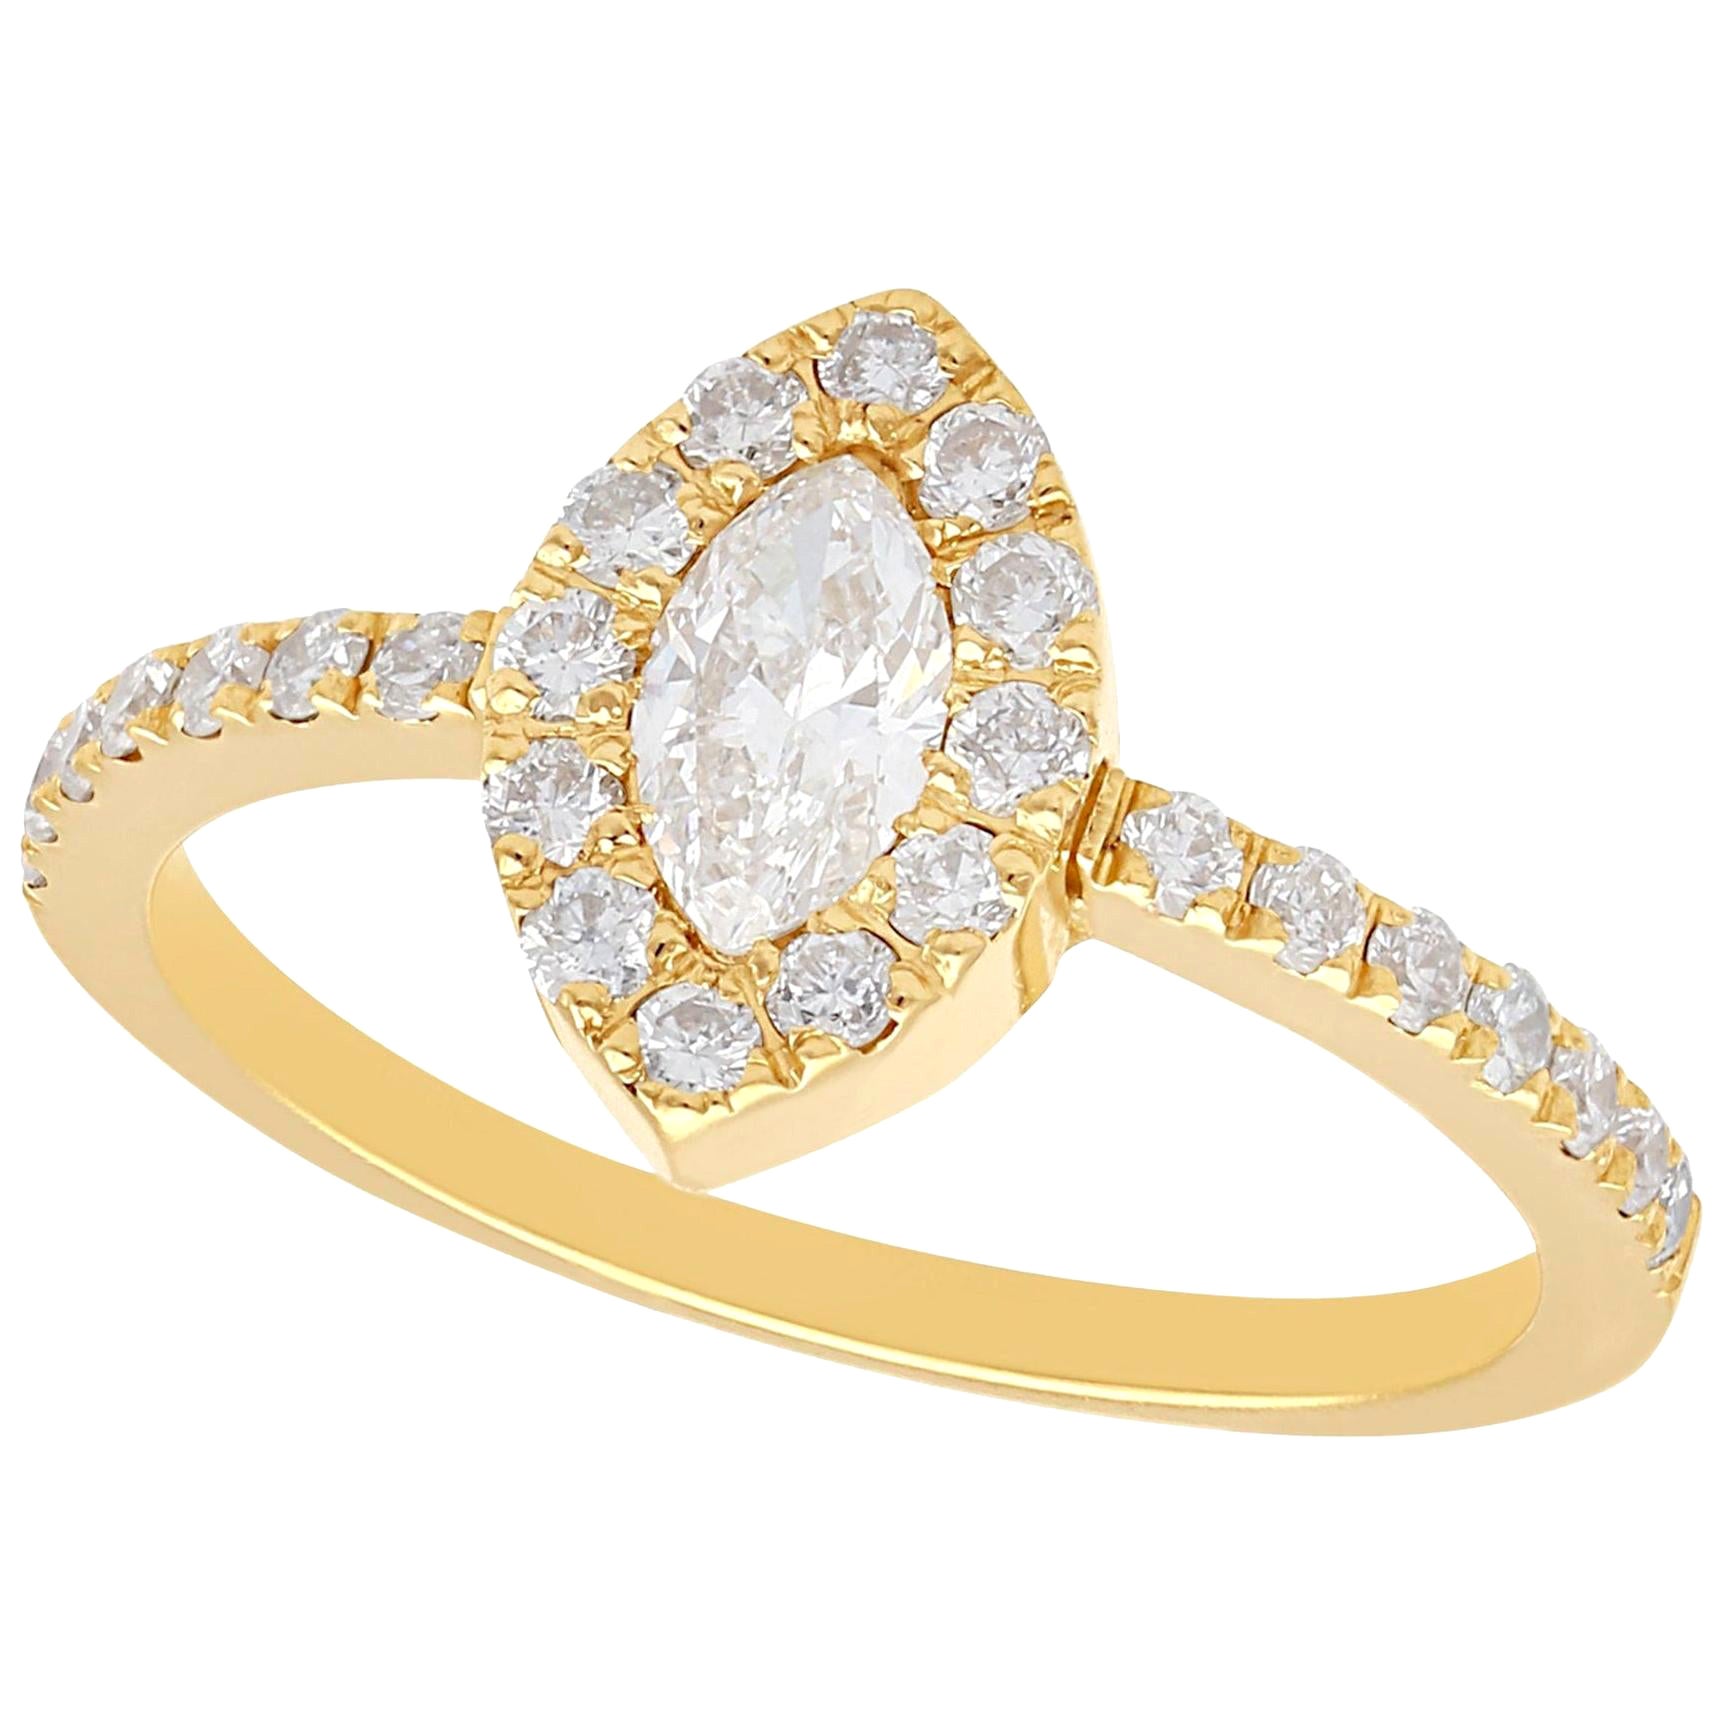 Vintage 0.82 Carat Diamond and 18Karat Yellow Gold Cluster Ring For Sale